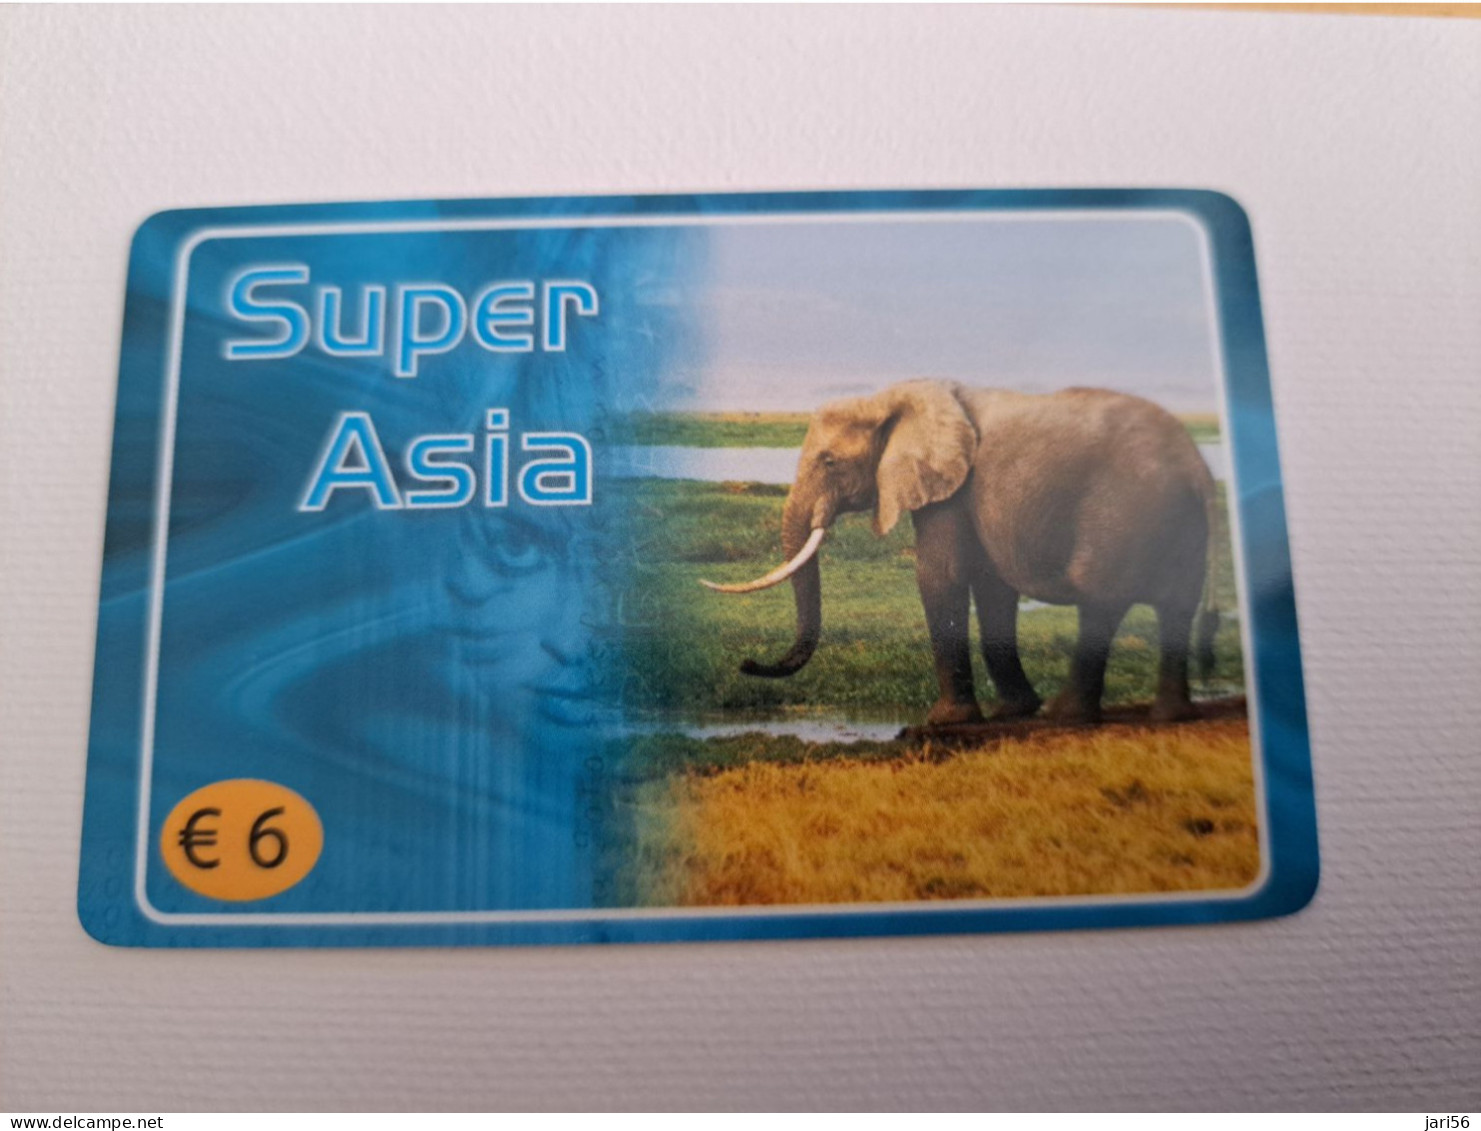 NETHERLANDS /  PREPAID / SUPER ASIA / ELEPHANT   /  € 6 ,-  USED  ** 15178** - Privat